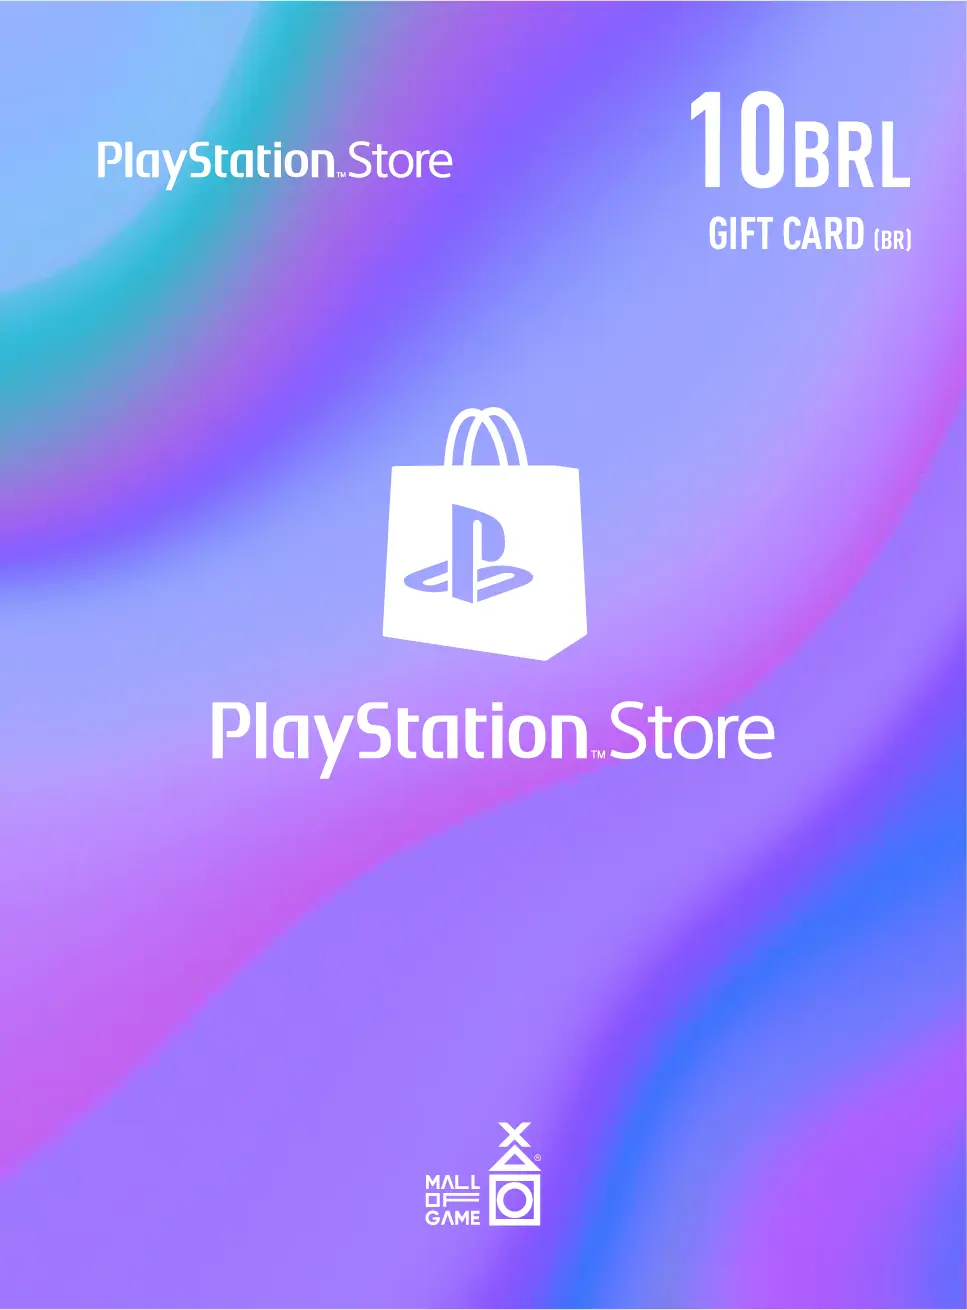 PlayStation™Store BRL10 Gift Cards (BR)